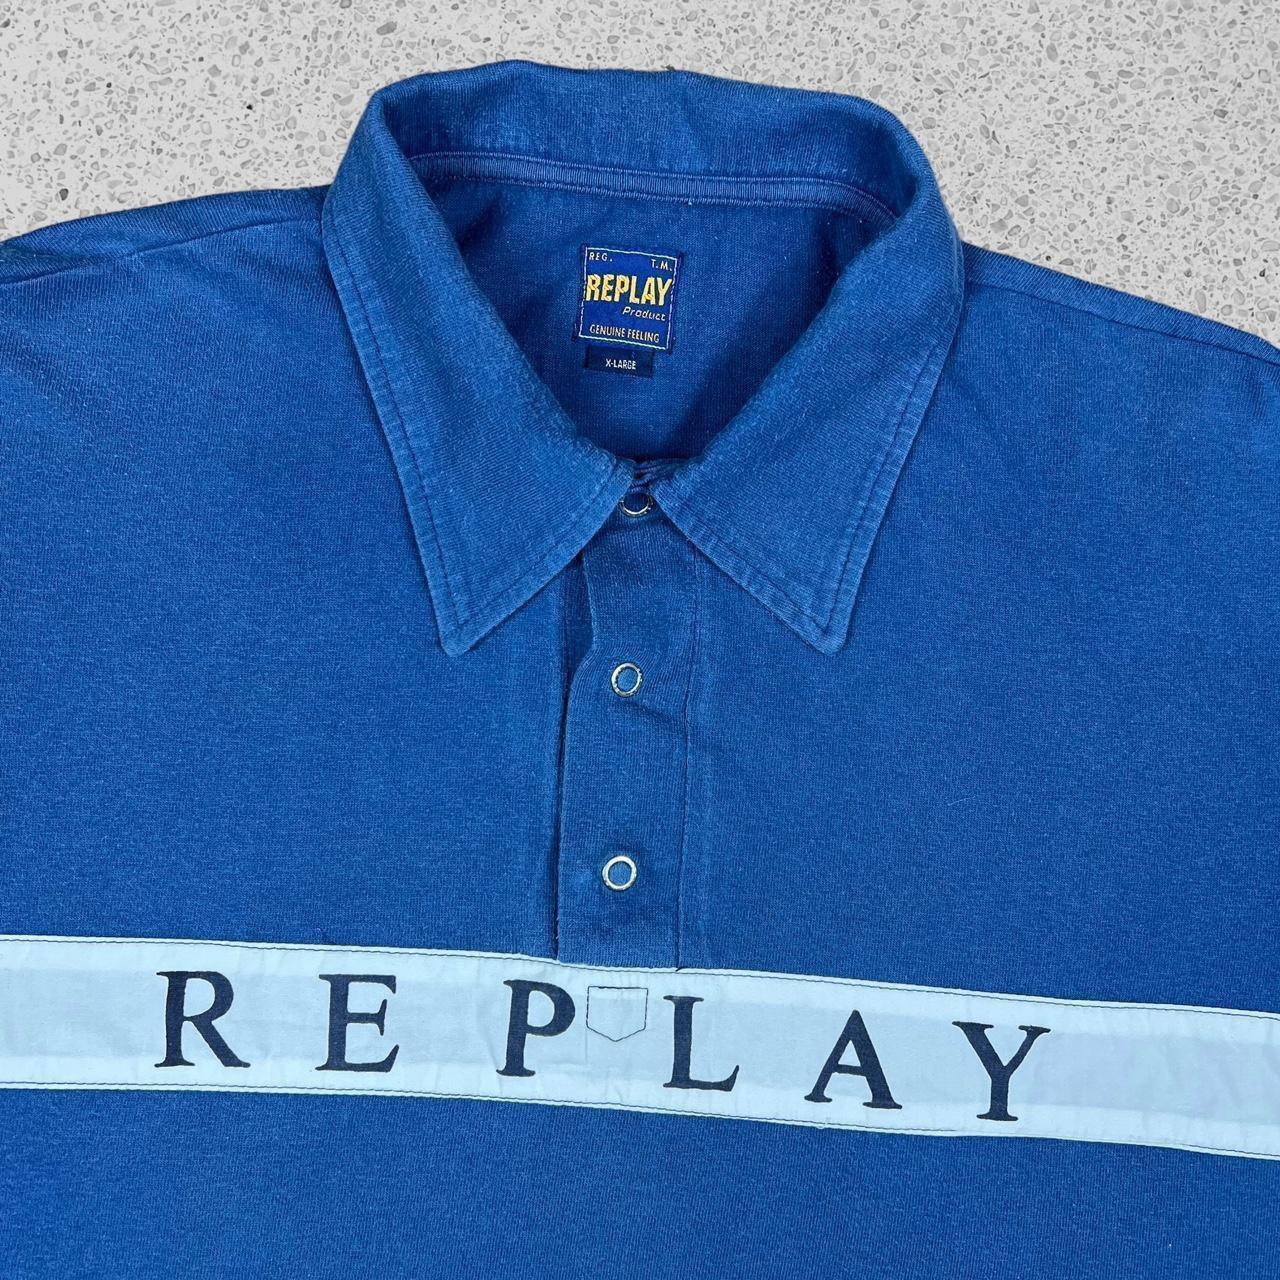 90s vintage polo shirt 90s Depop vintage - blue... Replay